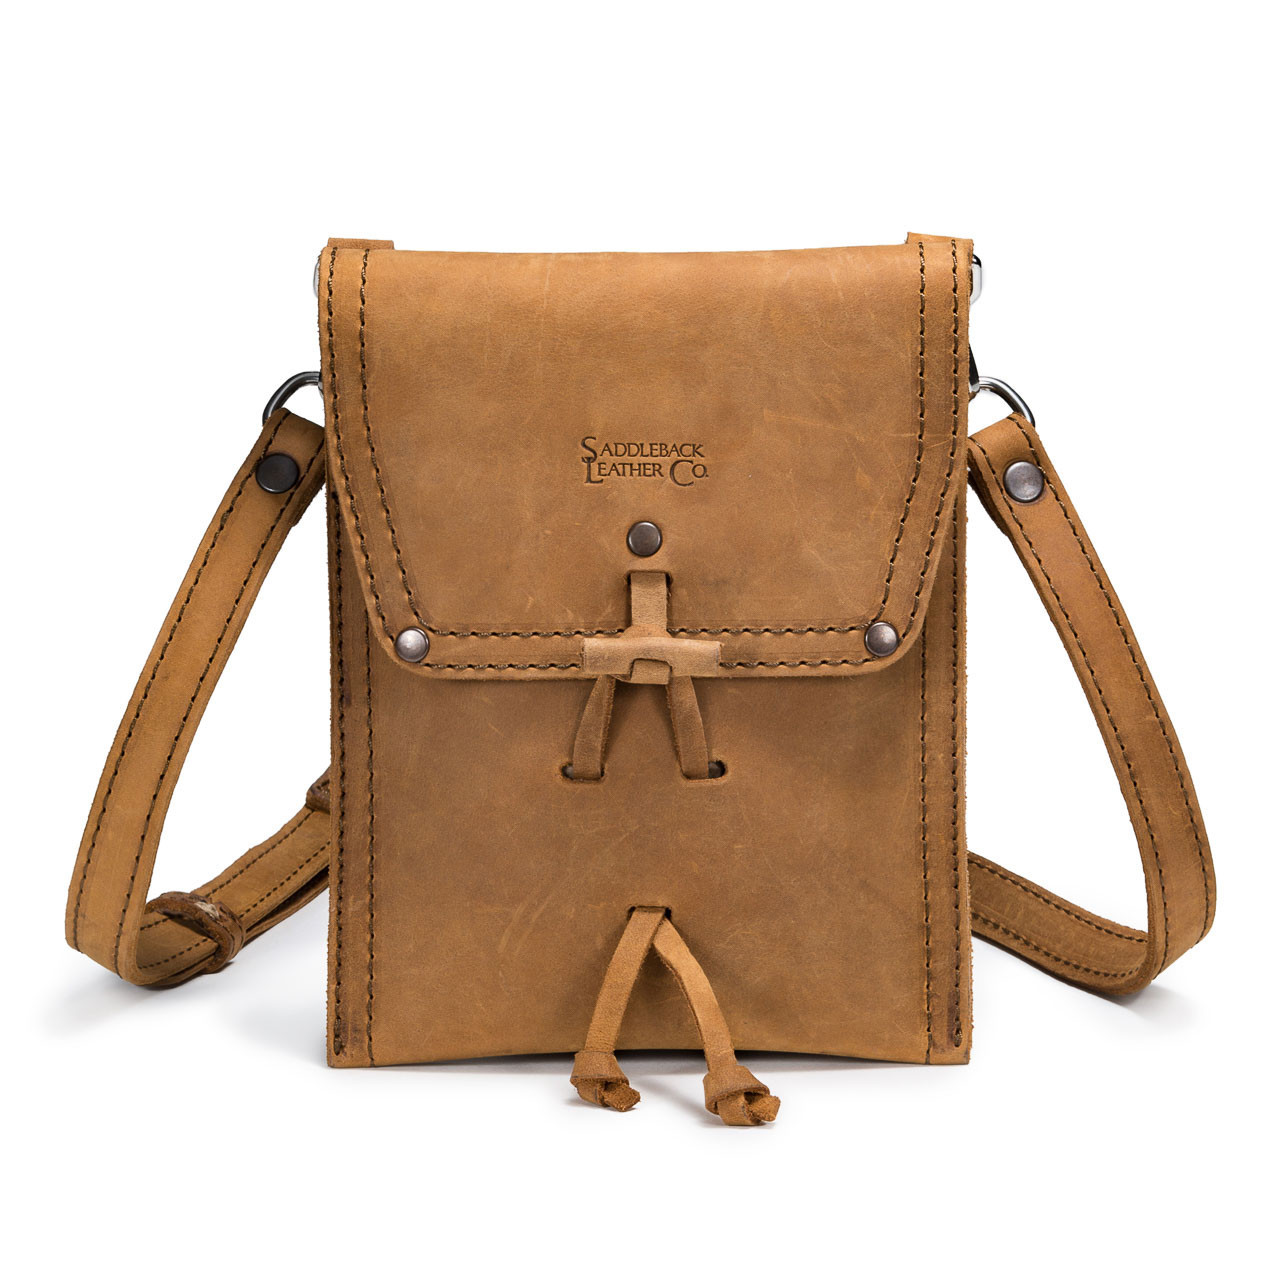 leather satchel bags